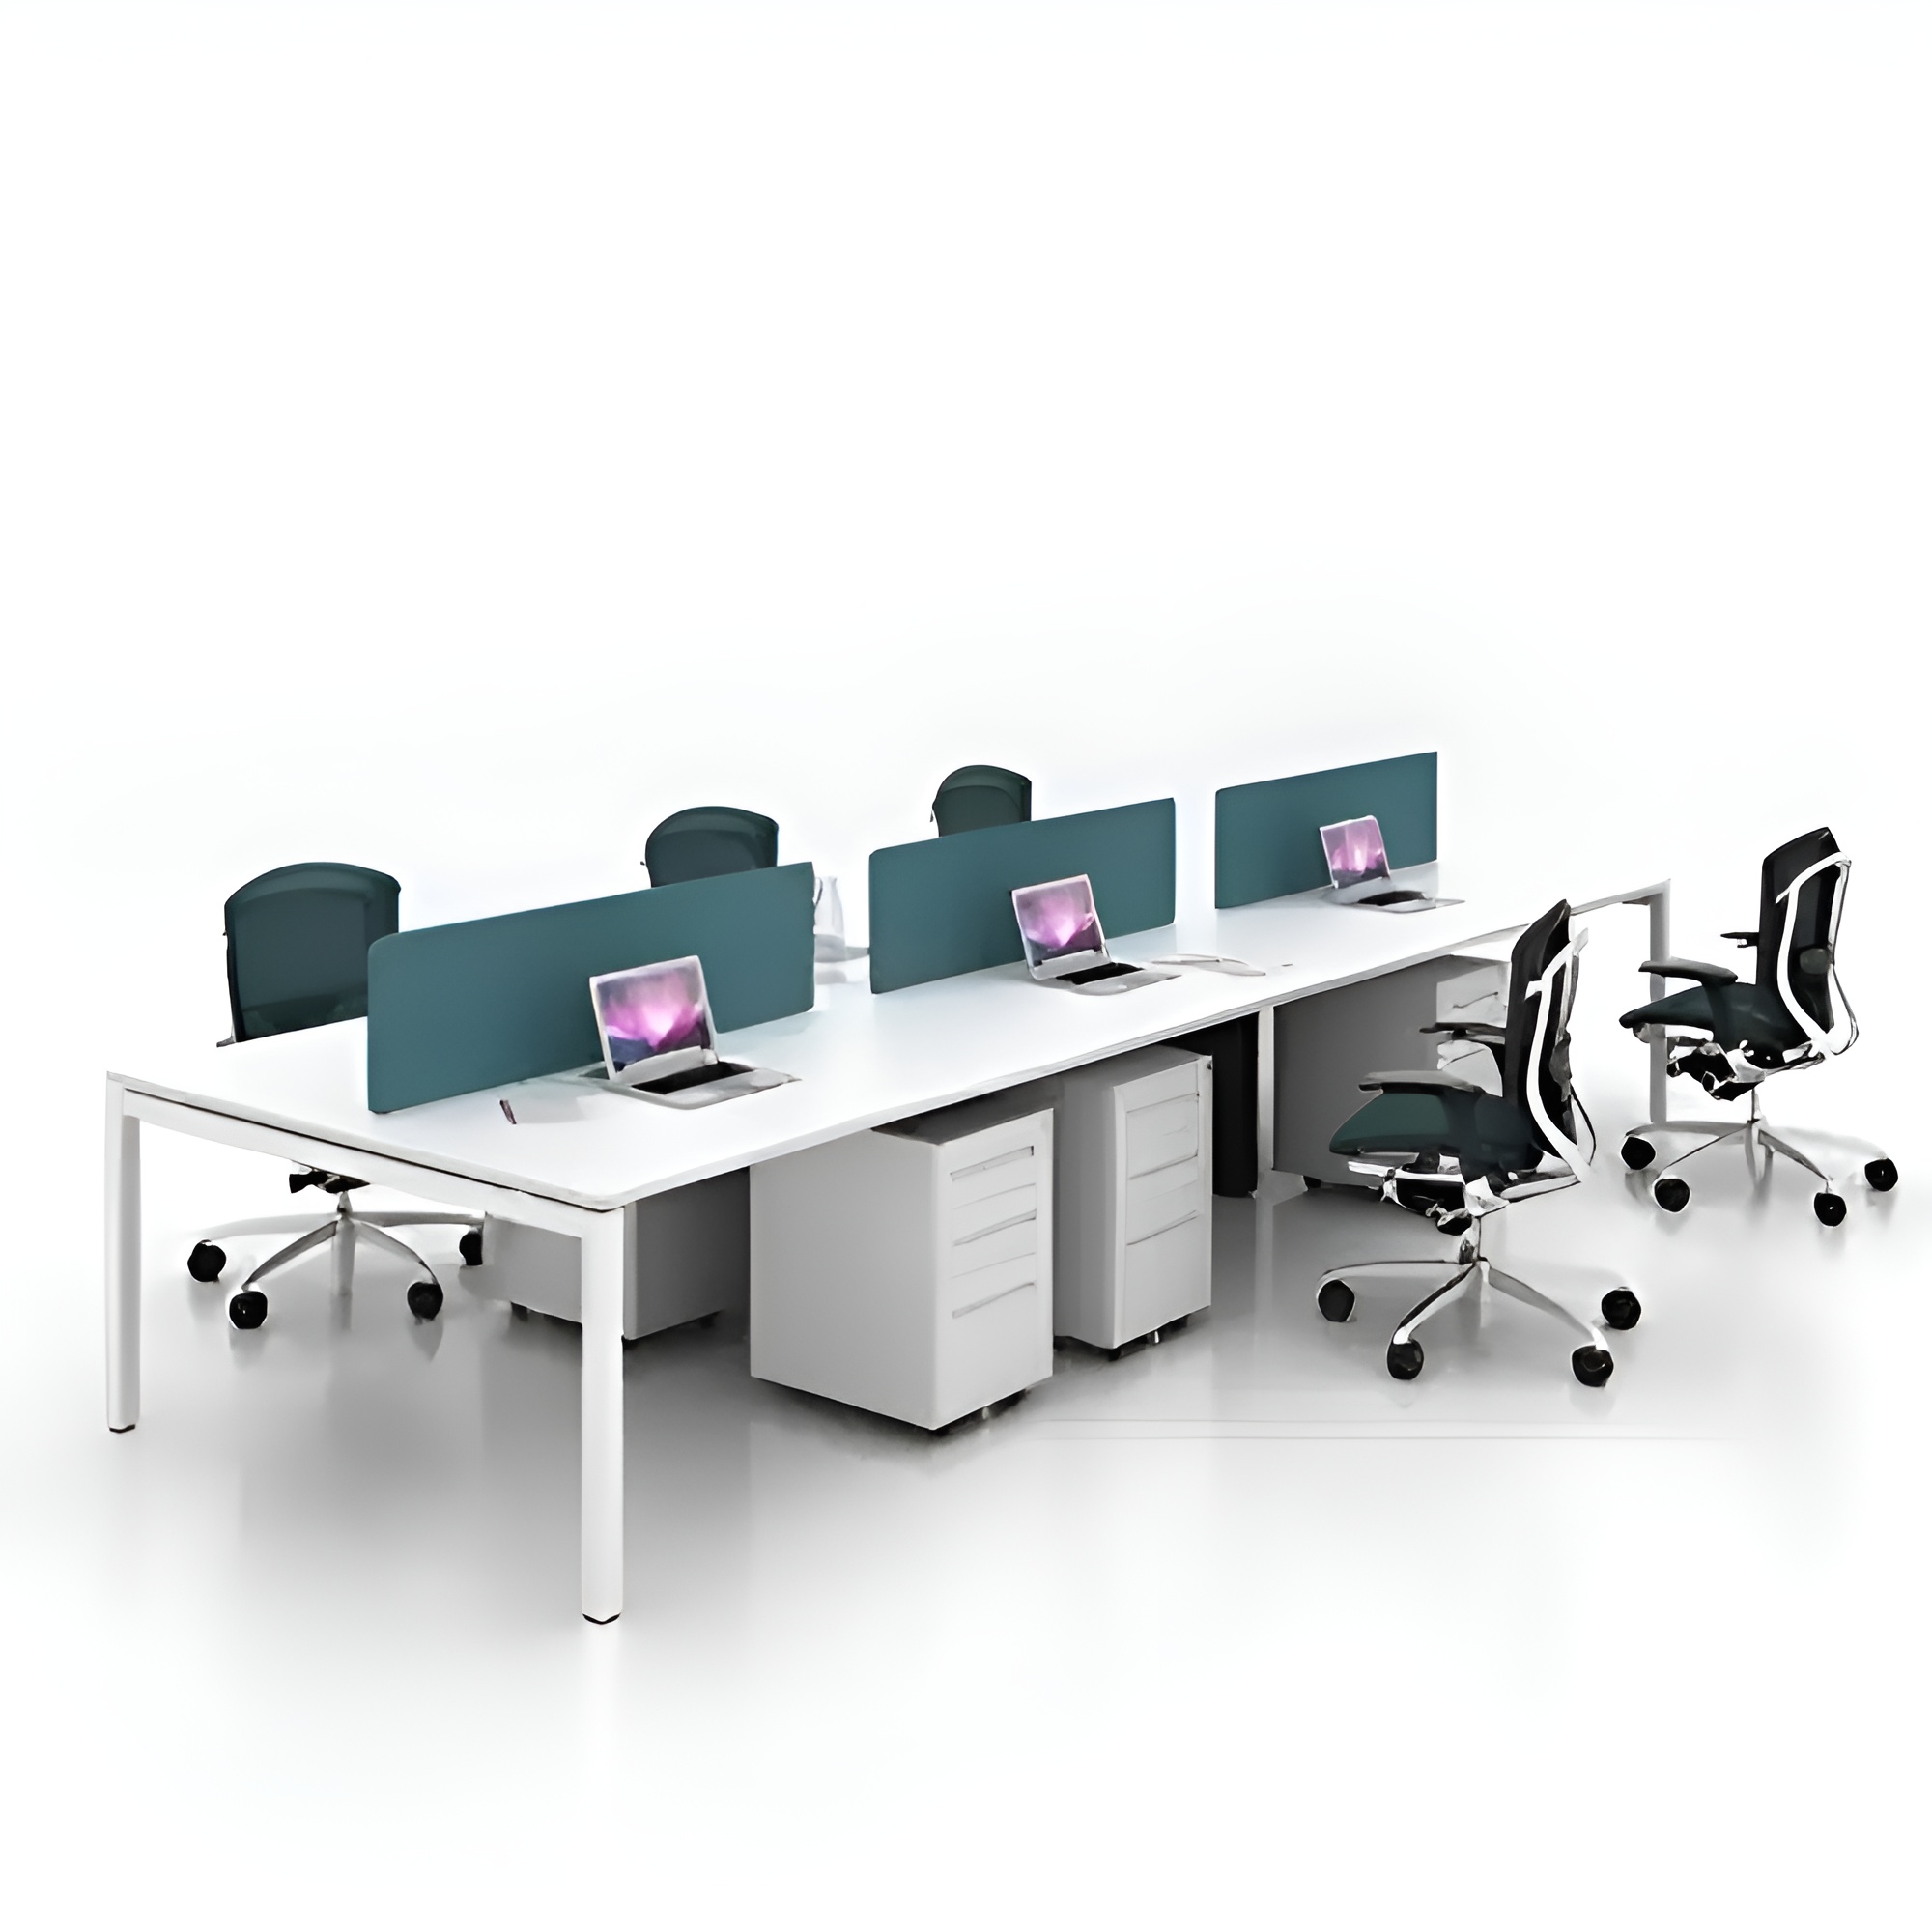 Office Combo 4: 4 Seater (4 x 8 feet) Open Type Workstation, 4 Ergonomic Chairs, 4 Pedestals